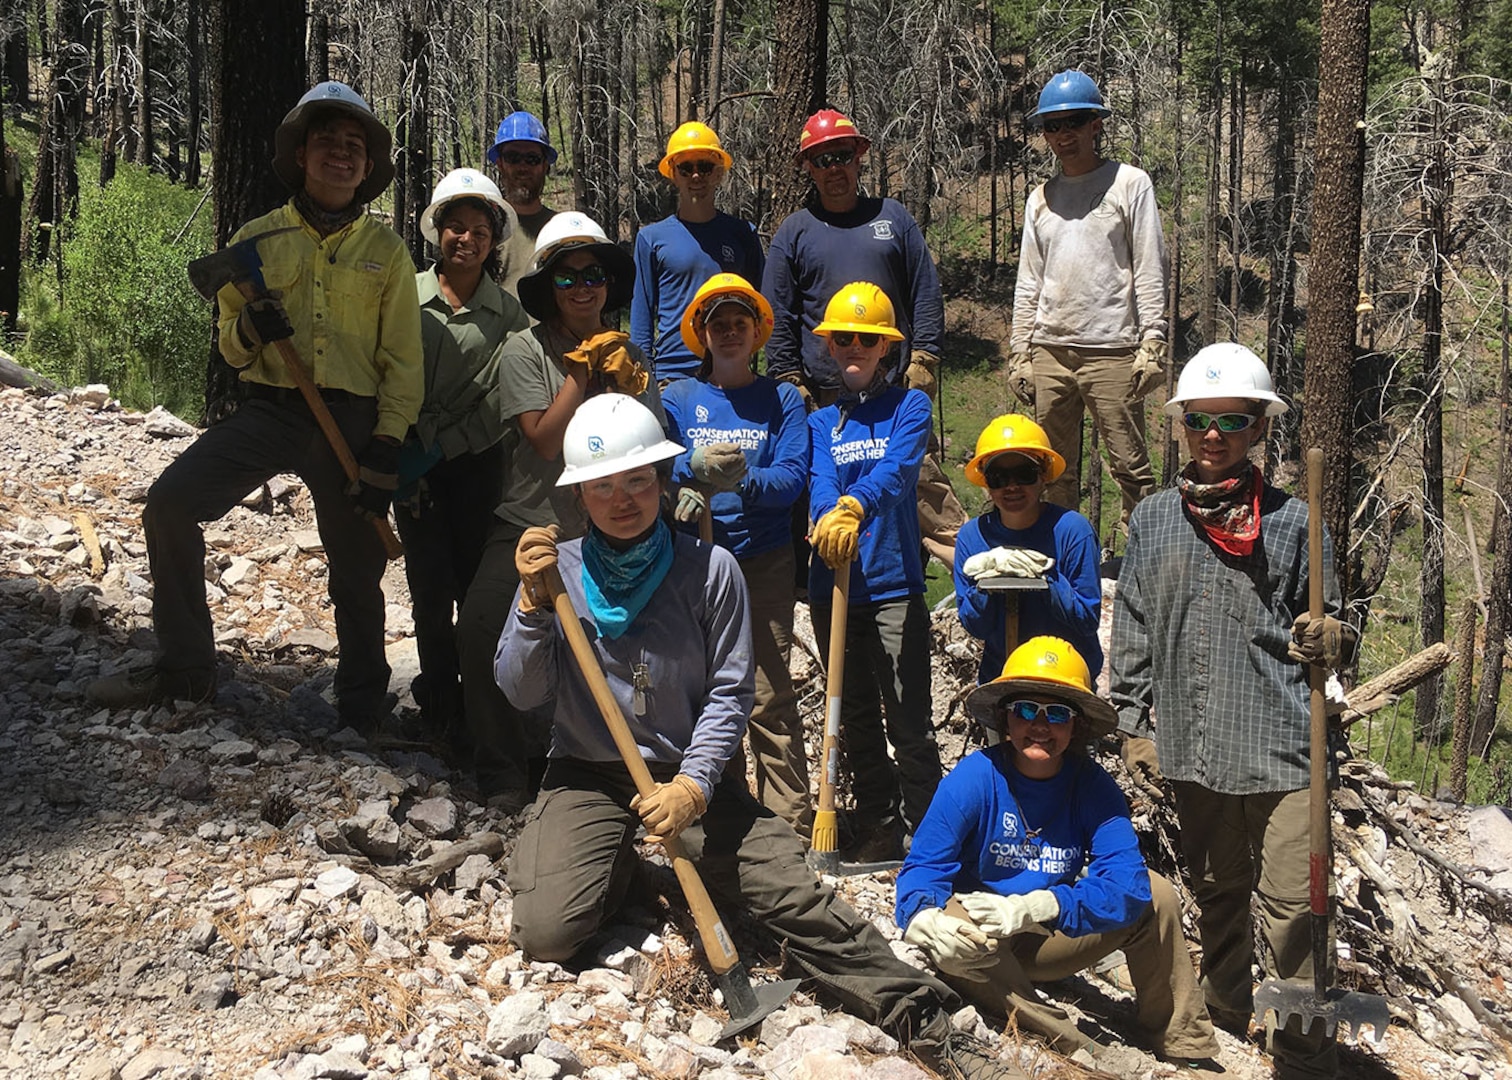 Youth Conservation Corps crew members and US Forest Service staff pose for a group photo in the Coronado National Forest in southern Arizona.